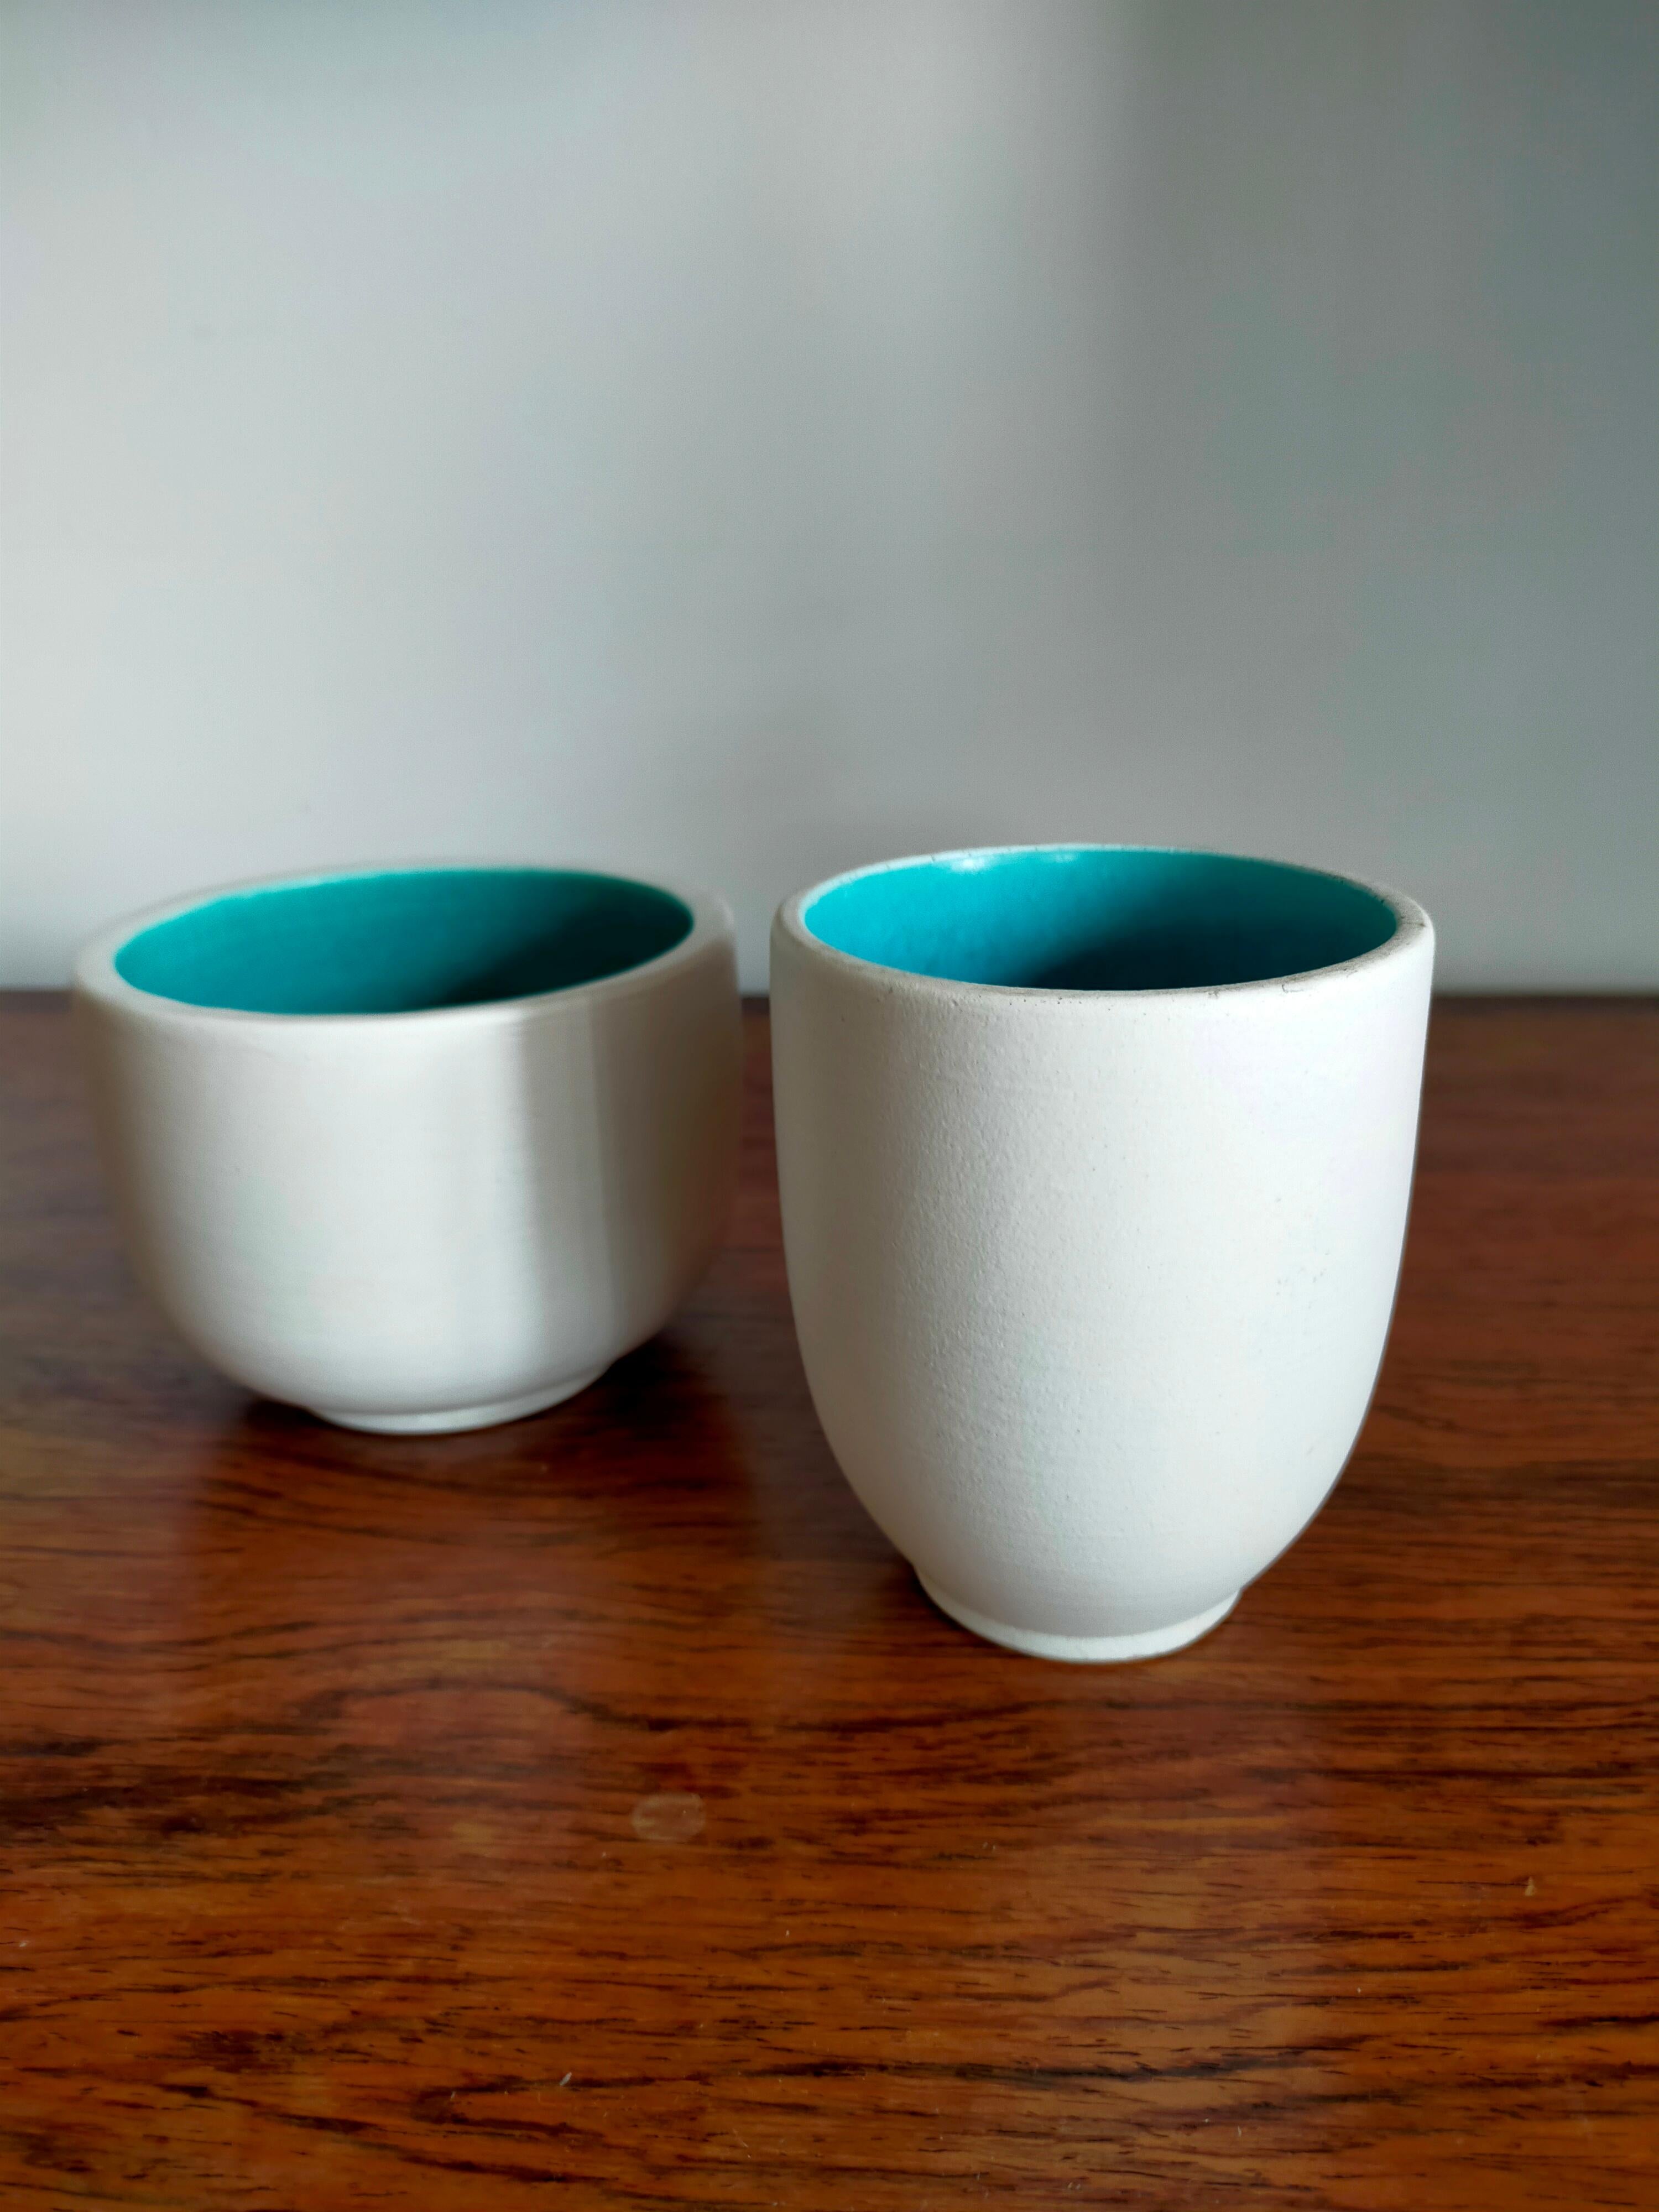 Set of cream glazed ceramic vide poche with turquoise blue interior.
Embossed Signature Kéramos Sèvres under the Base.
The small one is 9,4 x 11,2 cm
The tall one is 12,4 x 11,2 cm.